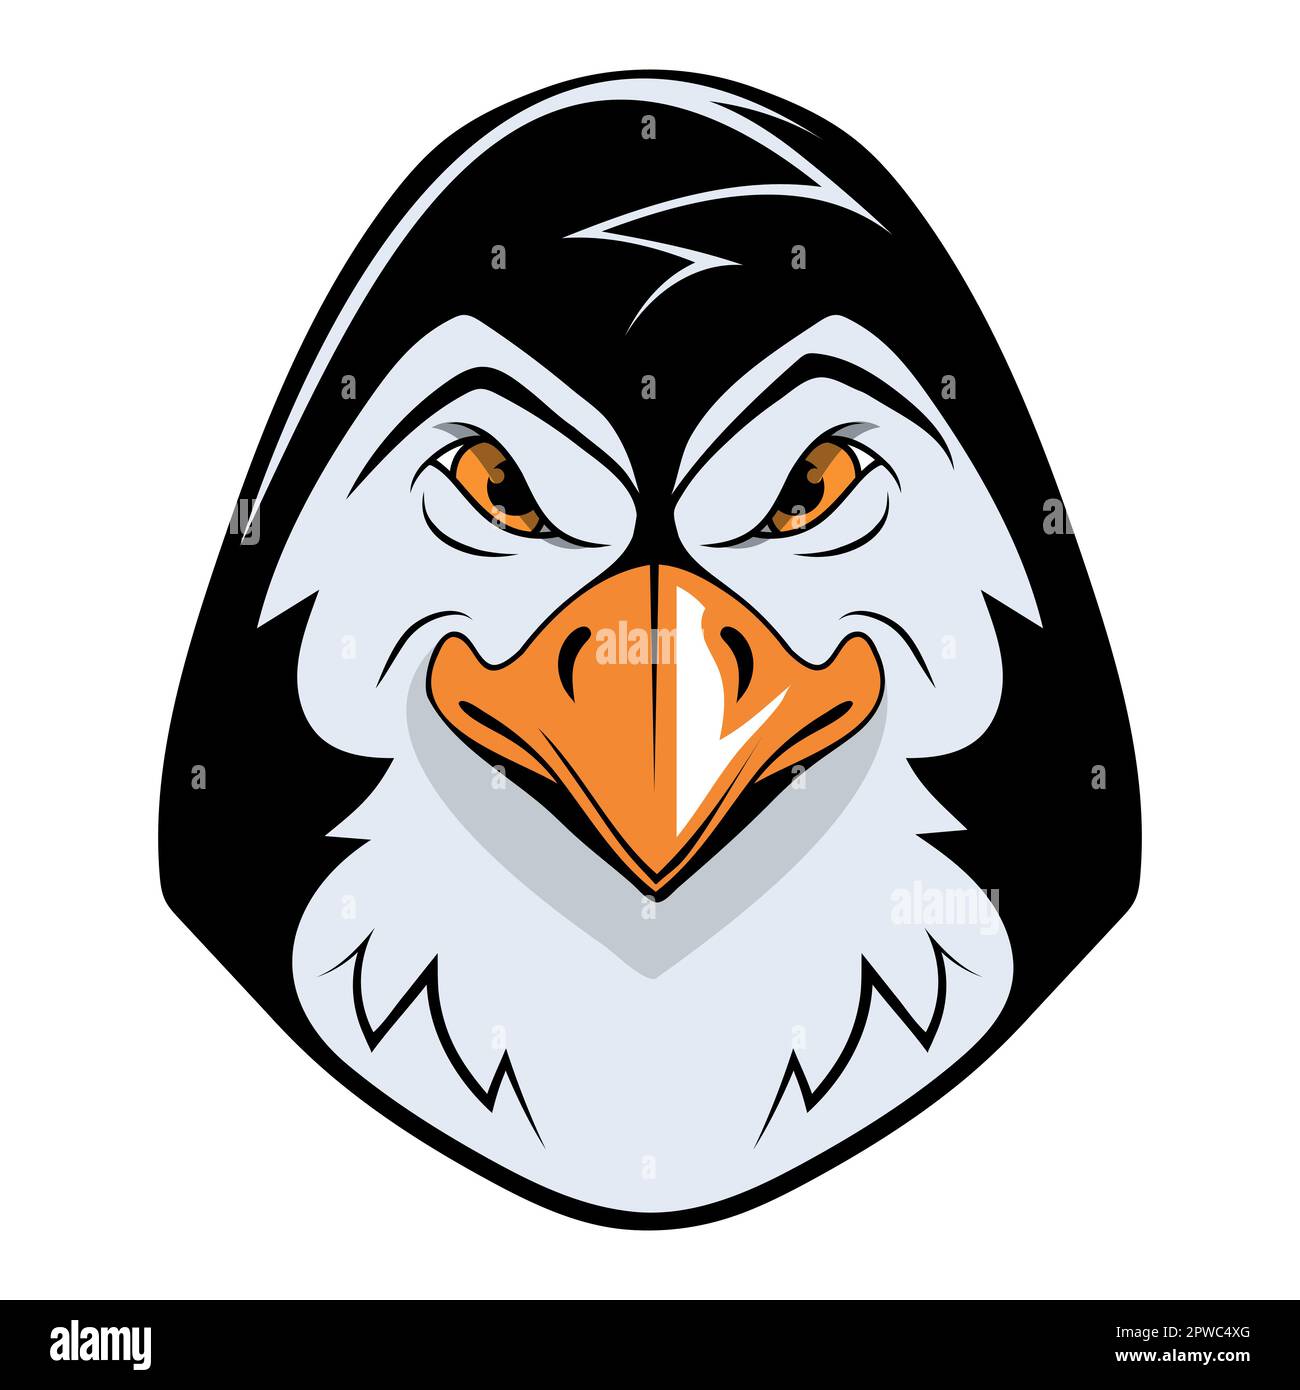 Emperor penguin. Vector illustration of a angry Antarctic animal. Keel-breasted bird Stock Vector